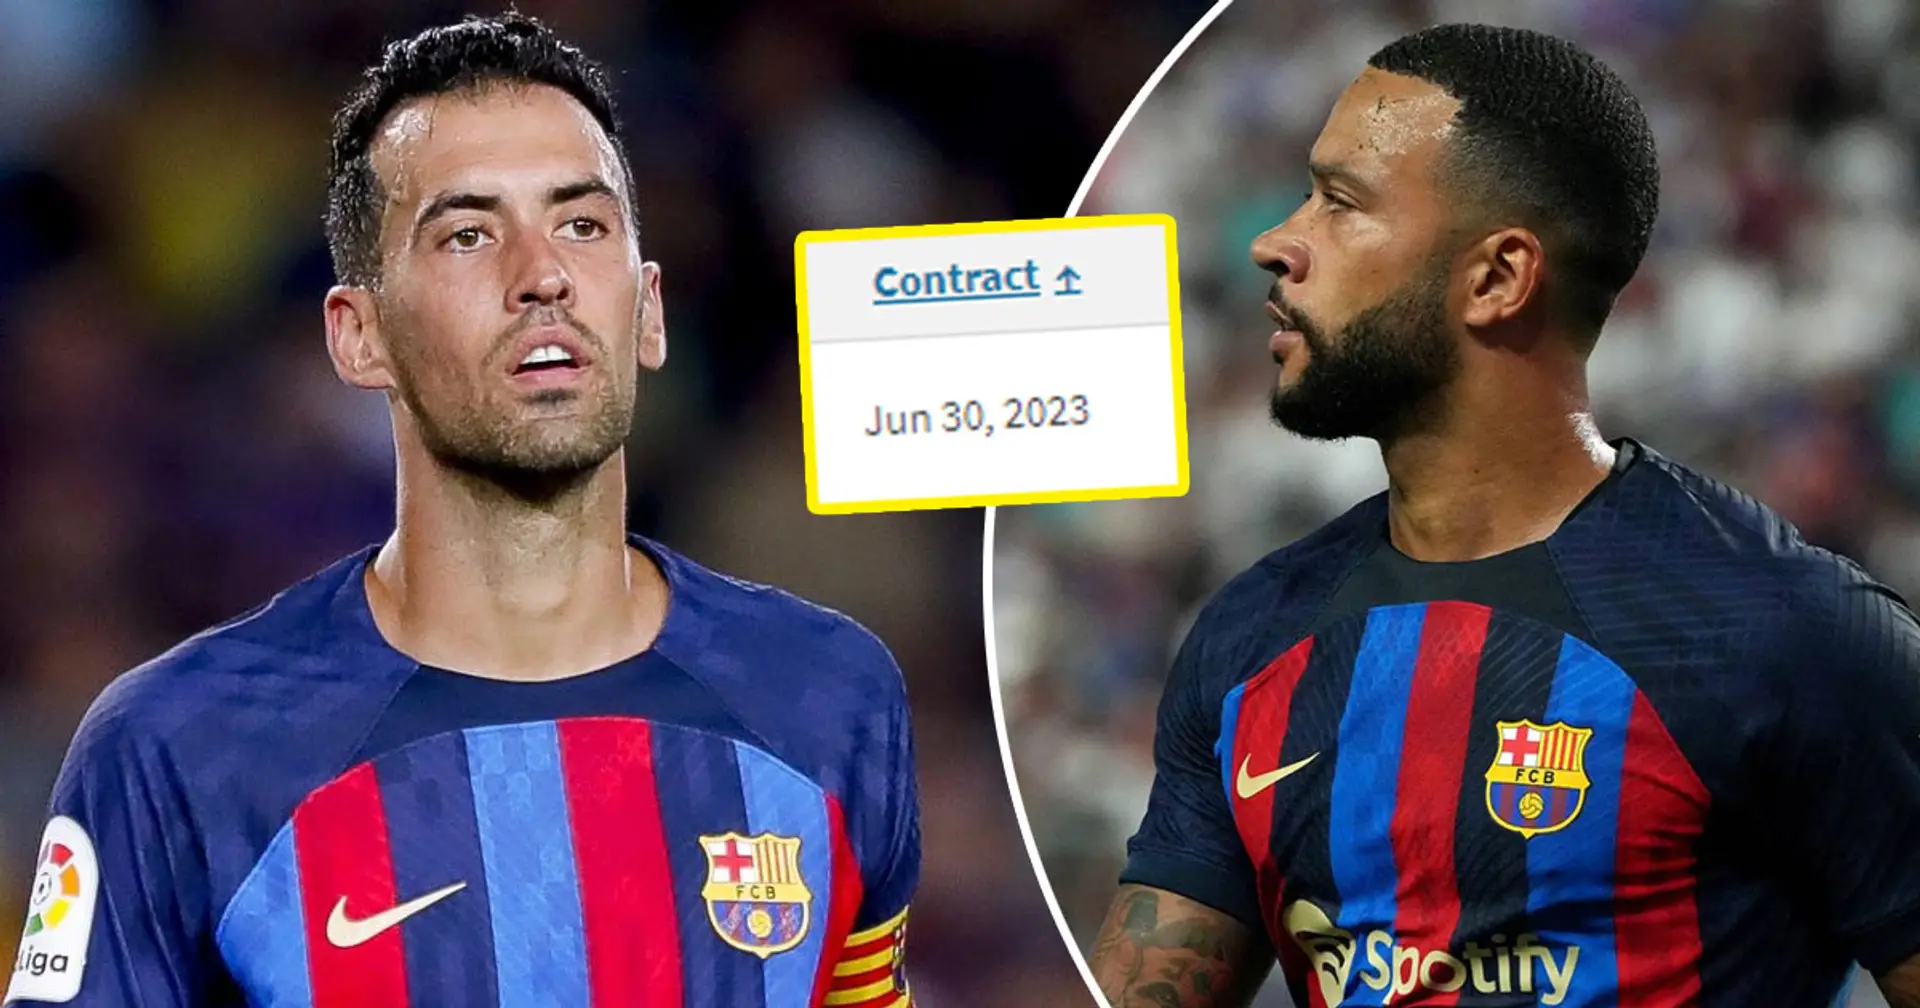 6 Barca players free to start negotiations with other clubs from today - we name them